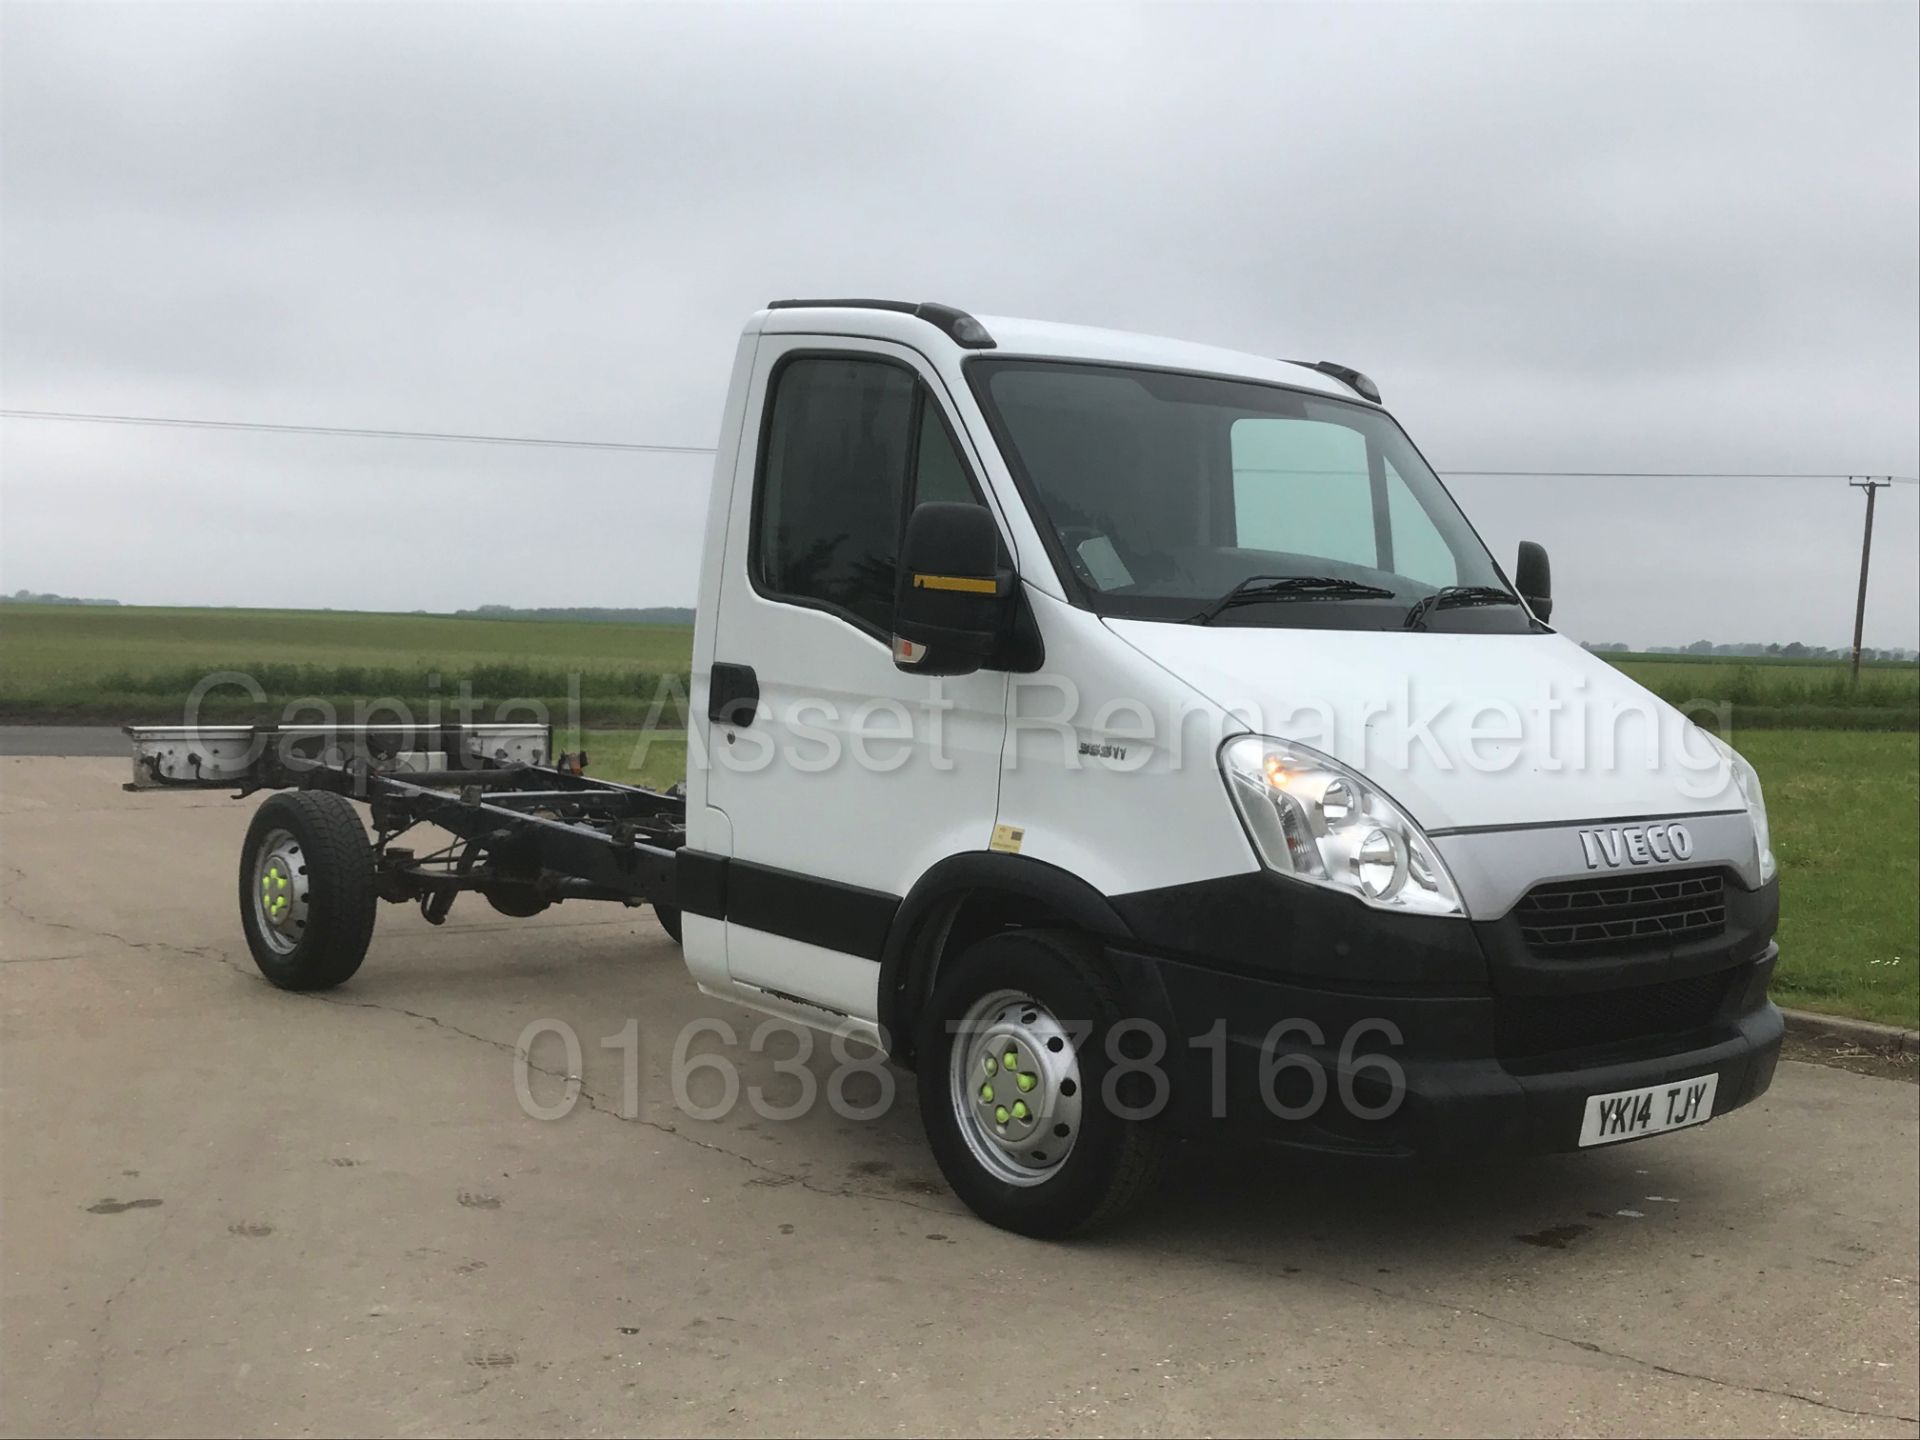 (ON SALE) IVECO DAILY 35S11 'LWB - CHASSIS CAB' (2014 - 14 REG) '2.3 DIESEL - 6 SPEED' (1 OWNER)